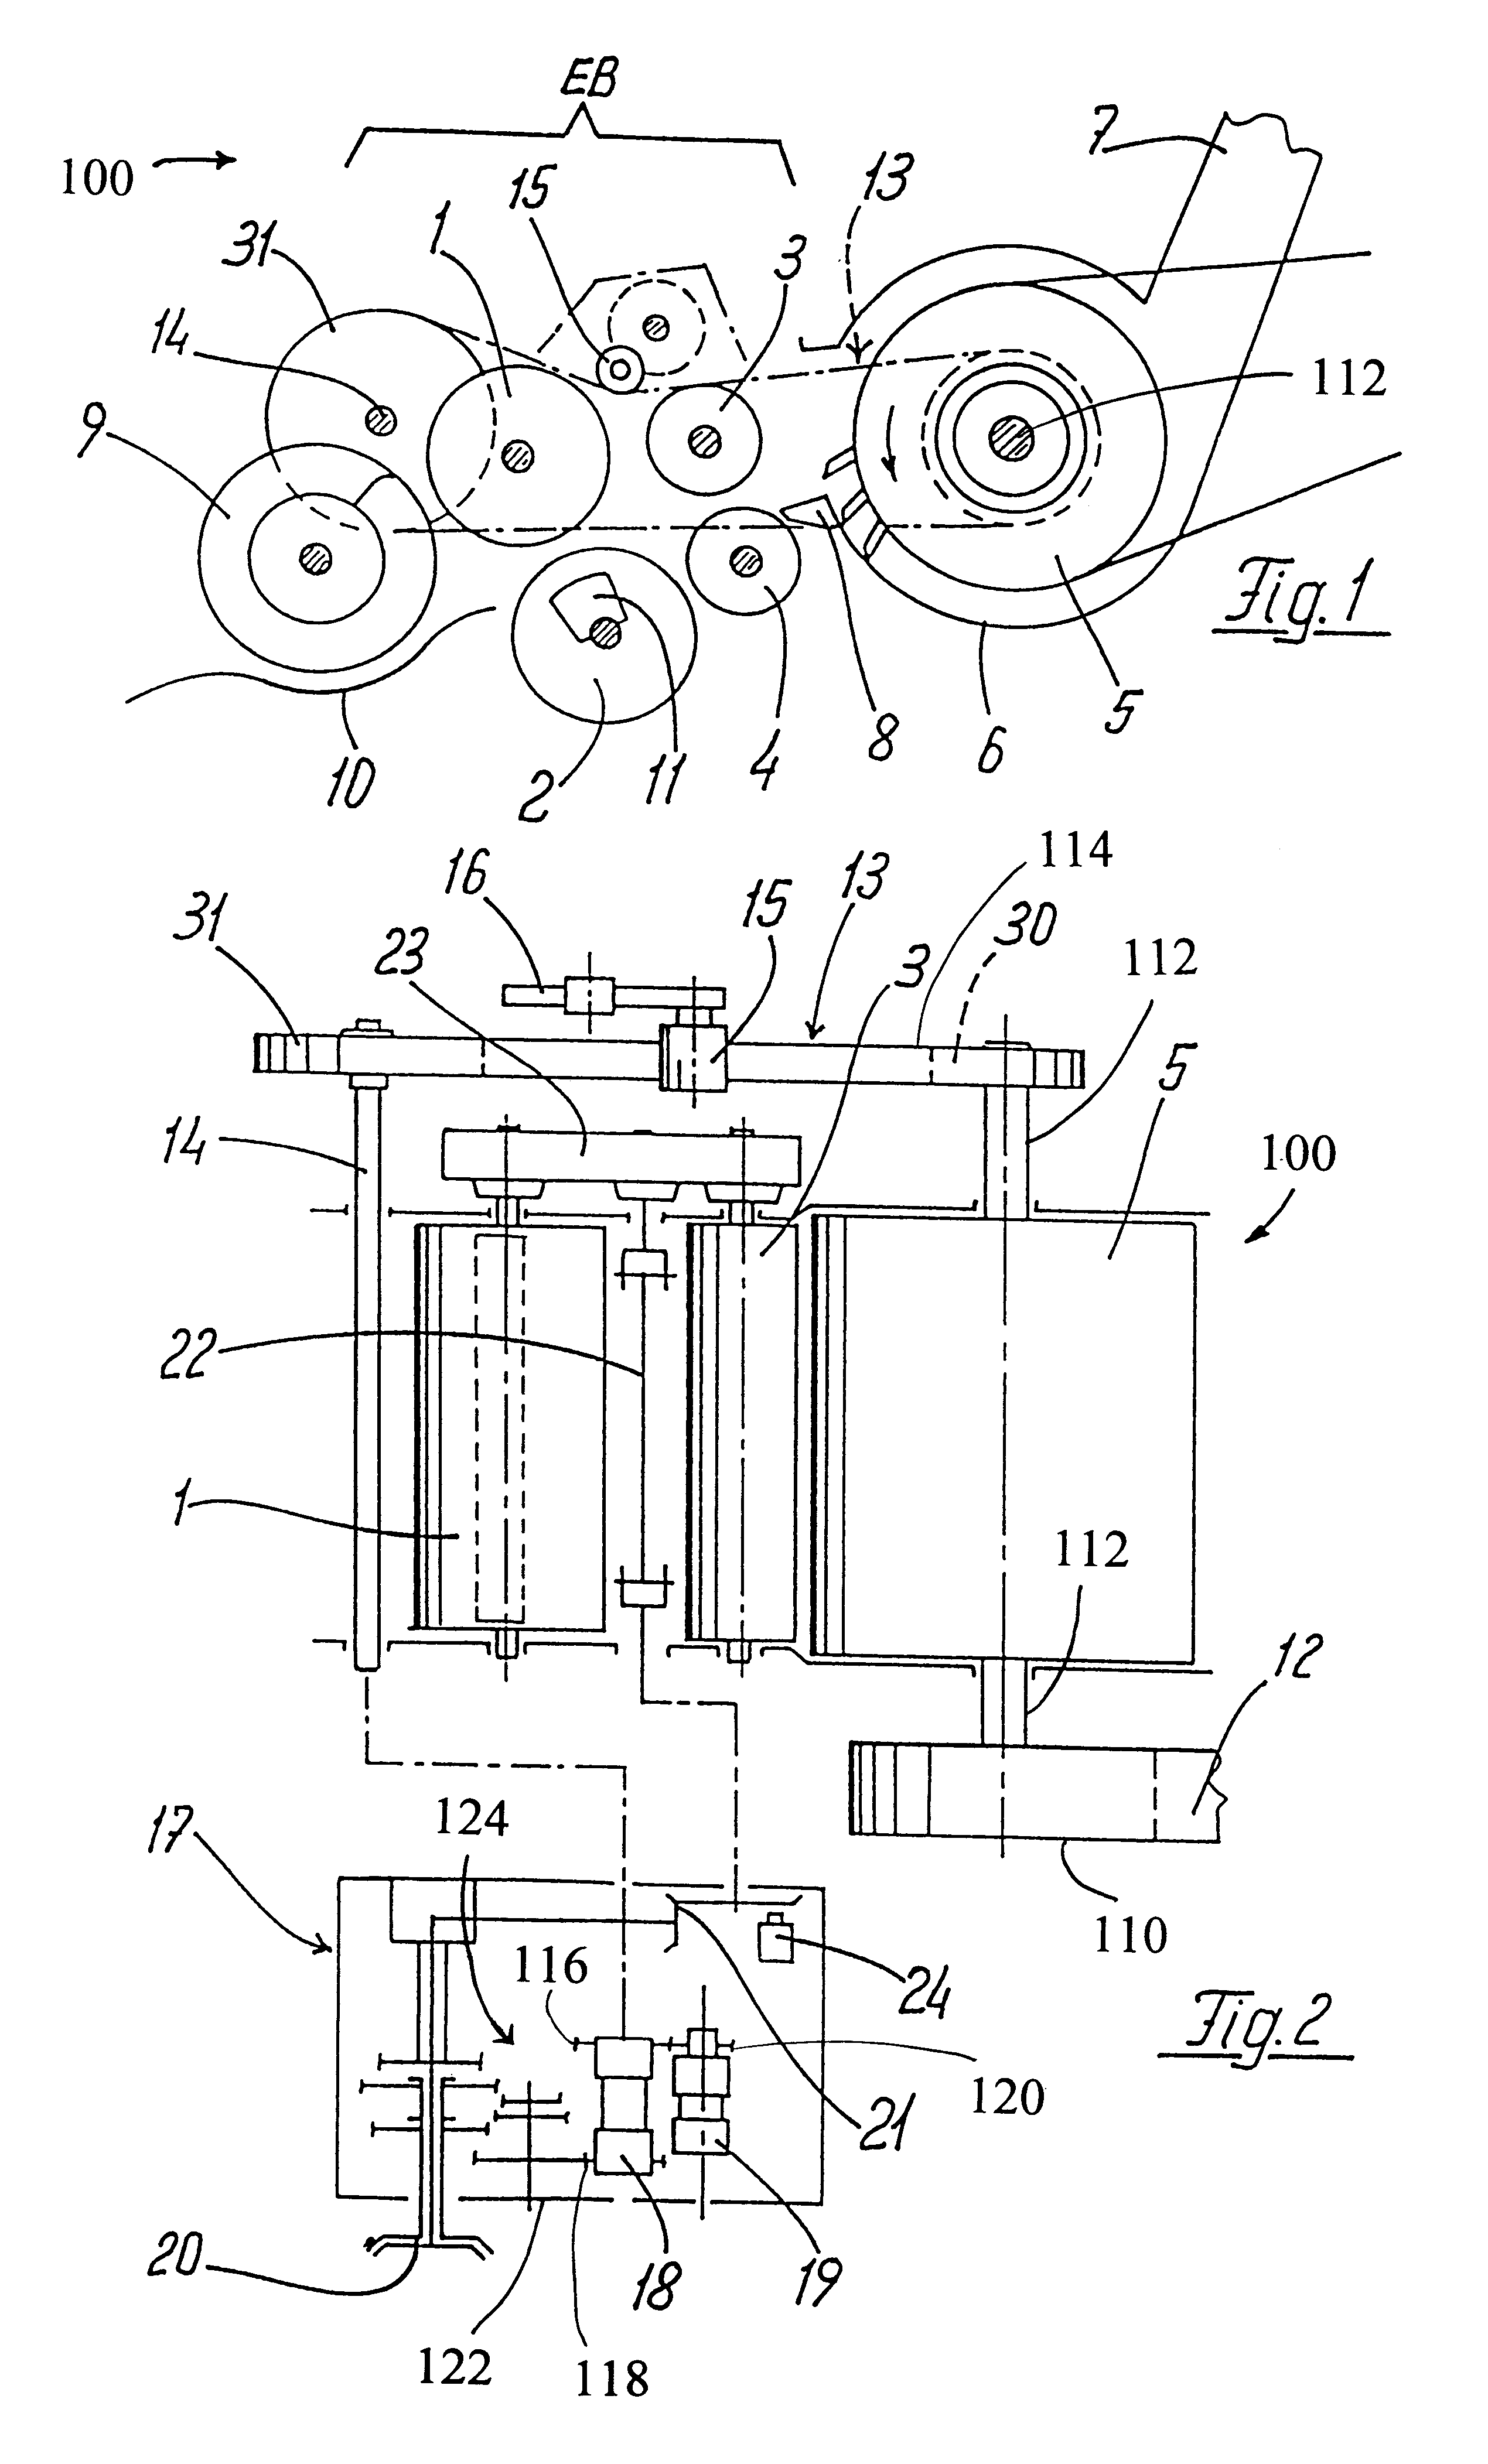 Device for monitoring the intake subassembly of an agricultural harvesting machine